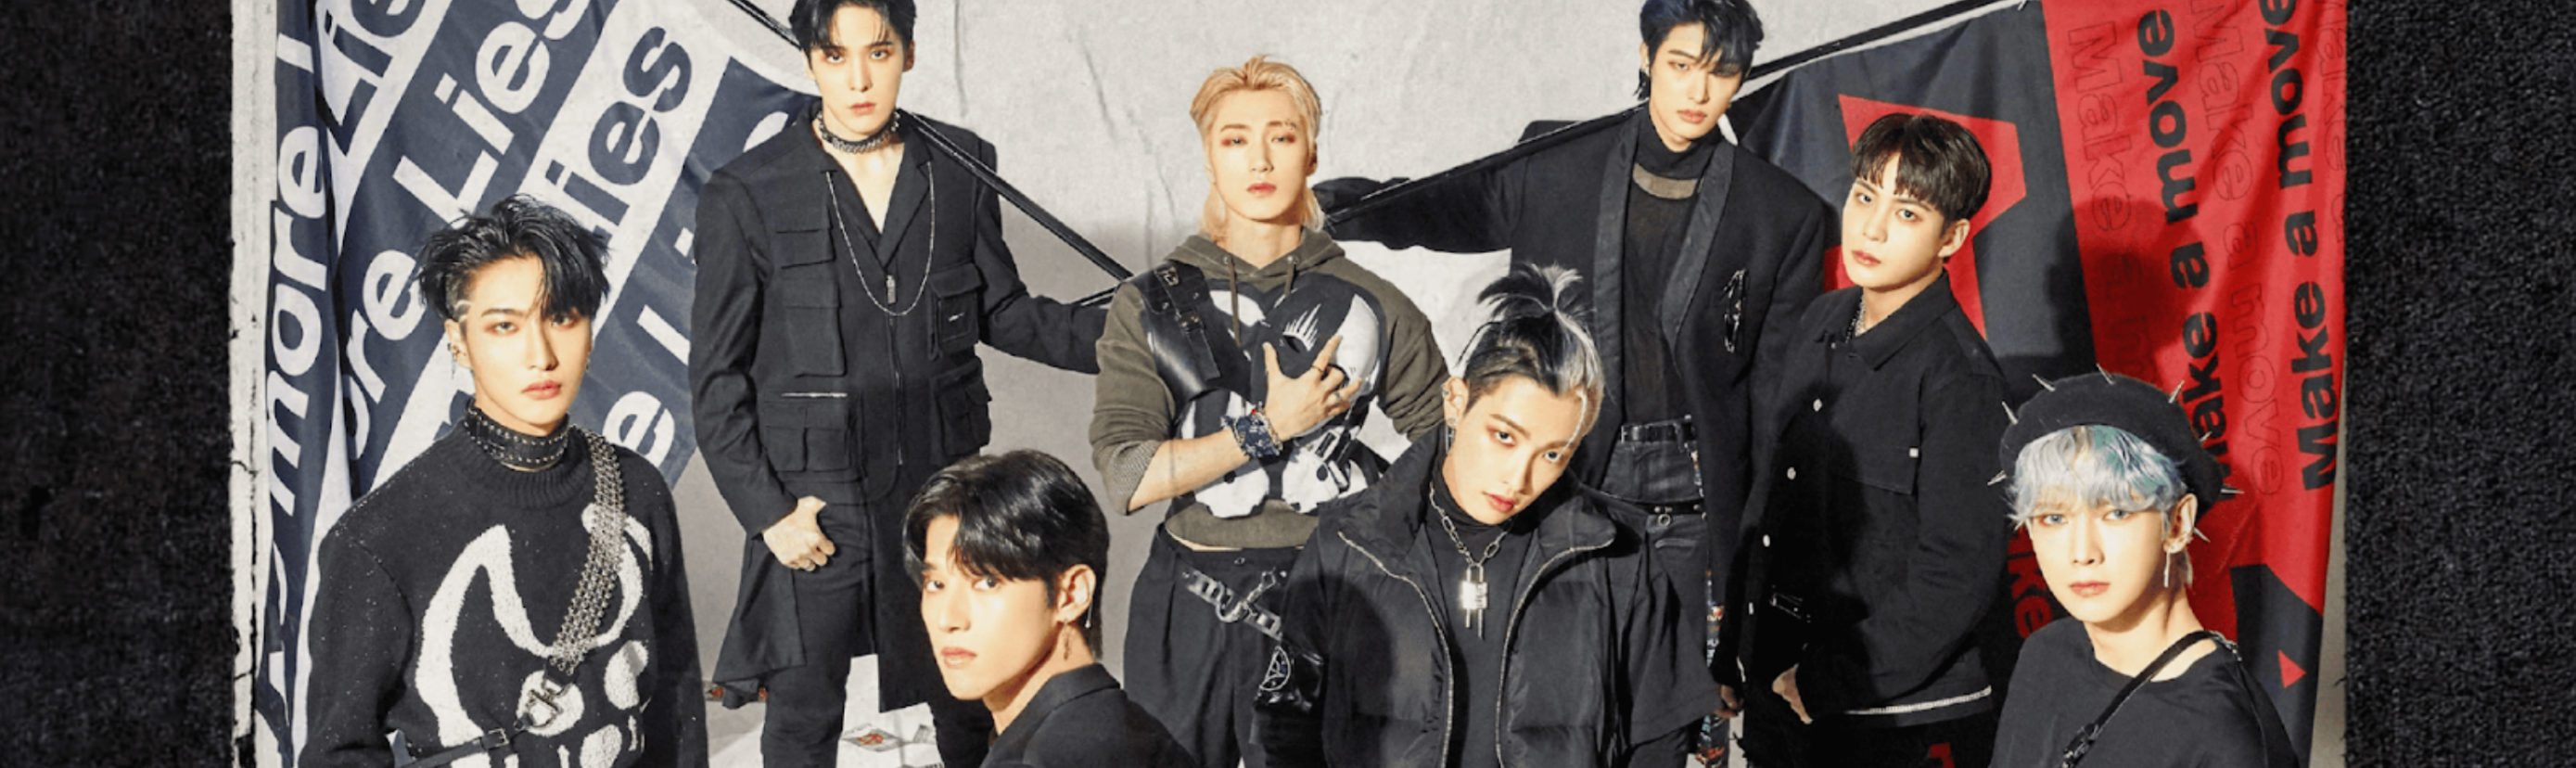 ateez the world ep.1: movement group image teaser: twitter